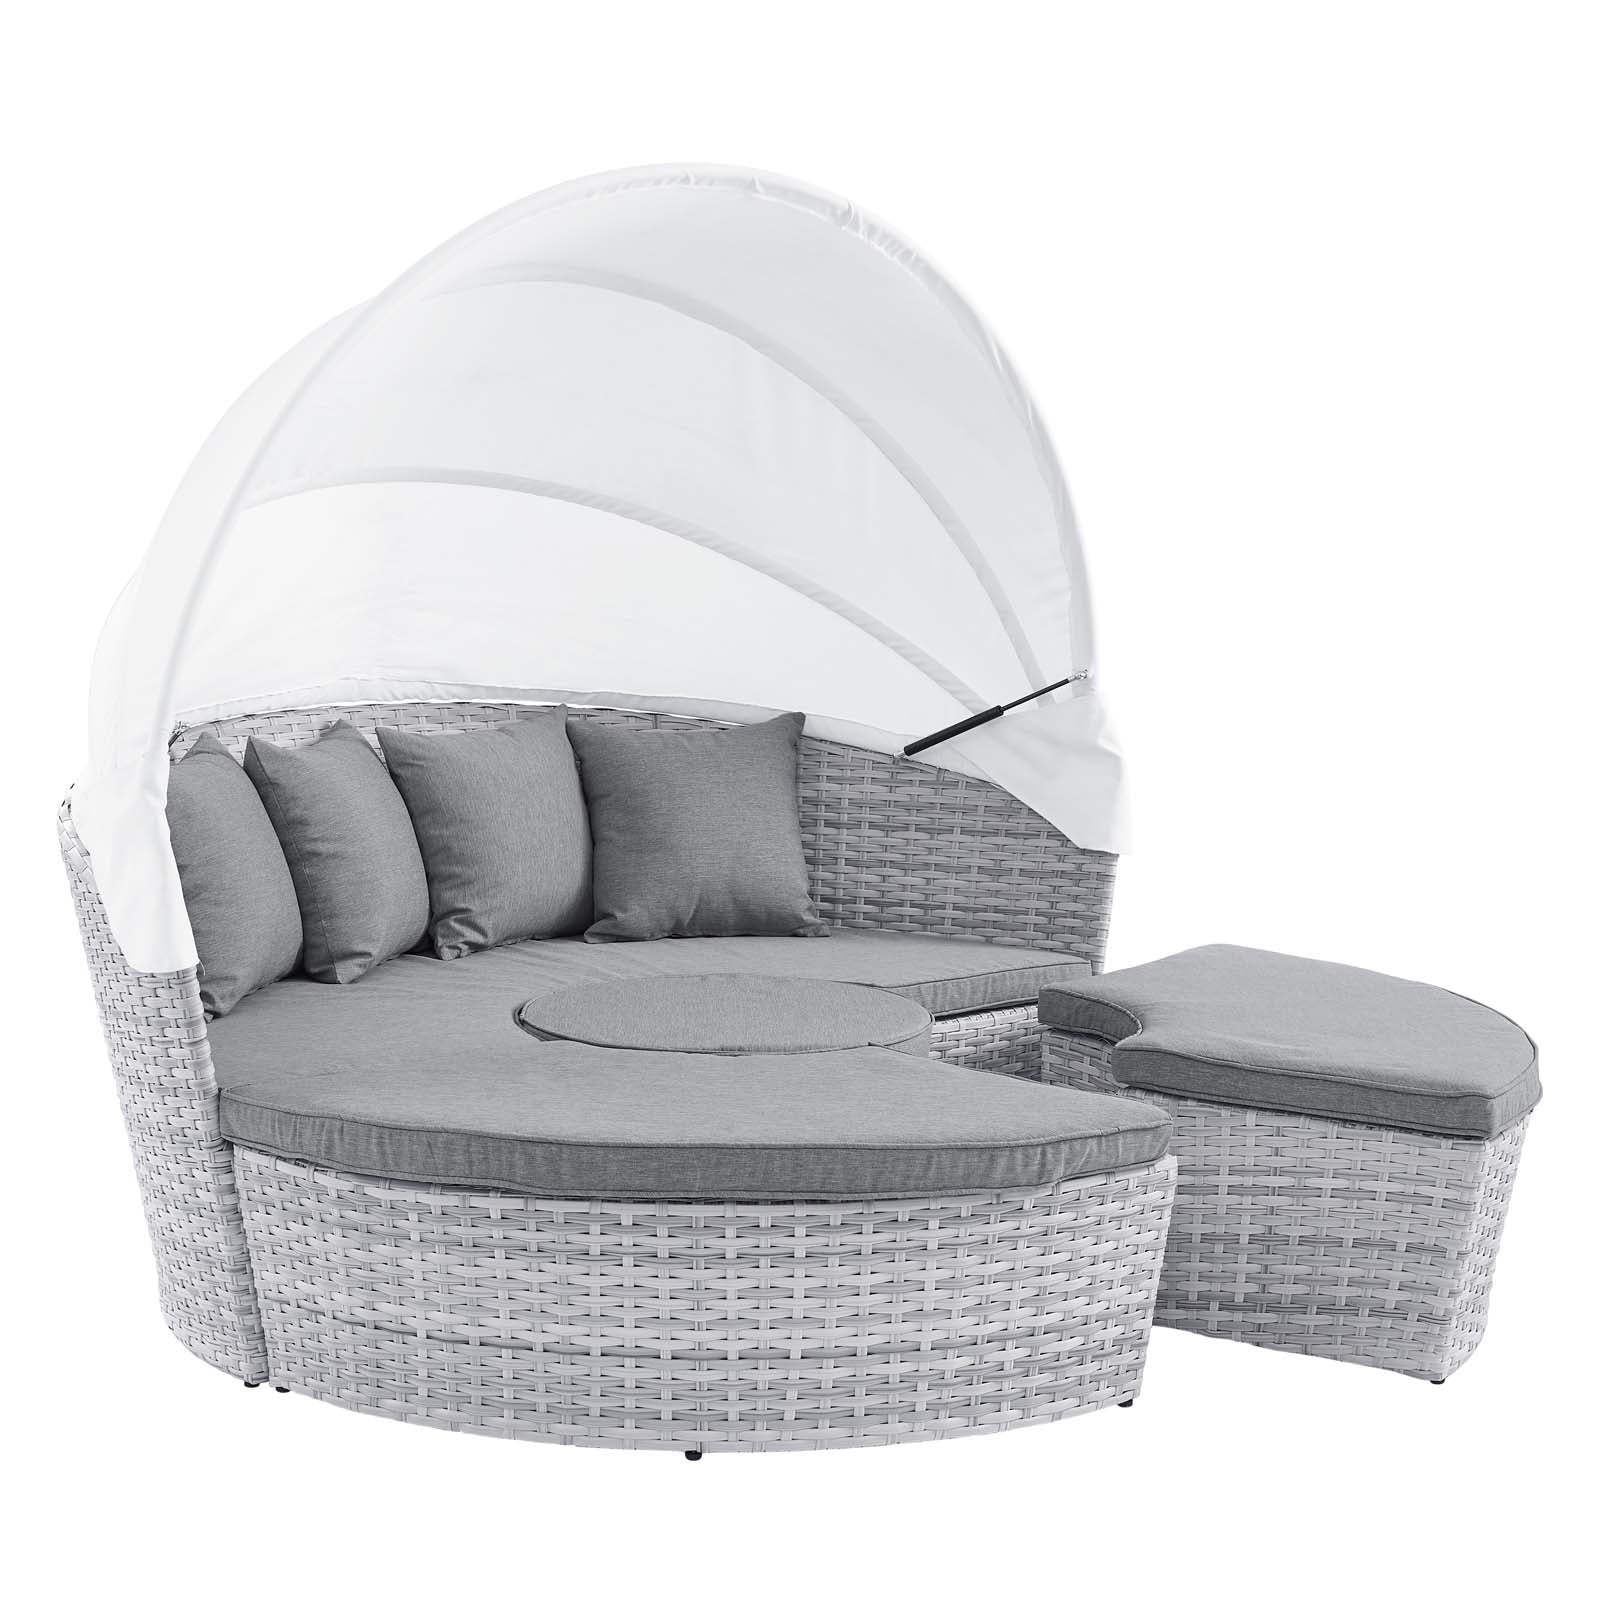 Modway Patio Daybeds - Scottsdale Canopy Outdoor Patio Daybed Light Gray